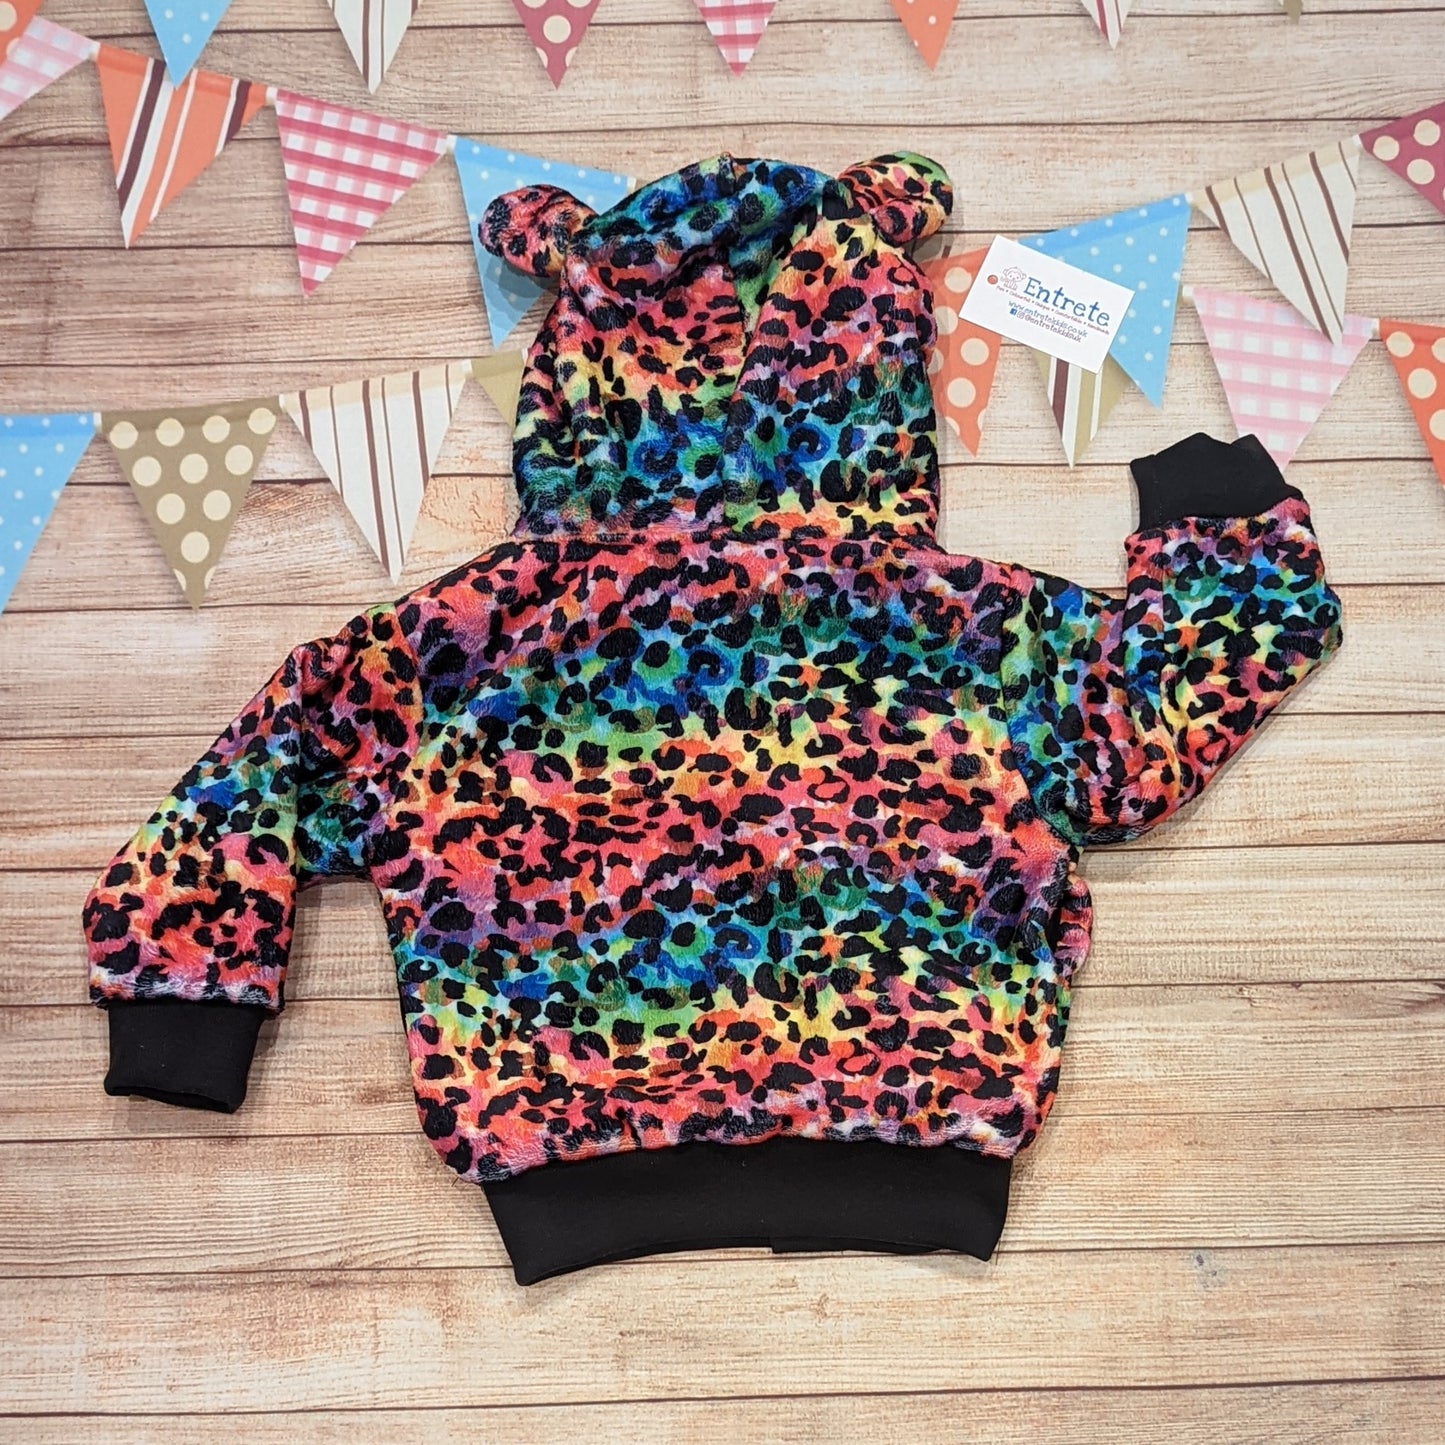 The colourful and warm rainbow leopard hoodie. Handmade using rainbow leopard print bubs fleece, black cotton ribbing, with a black cotton jersey reverse. Shown from the rear.